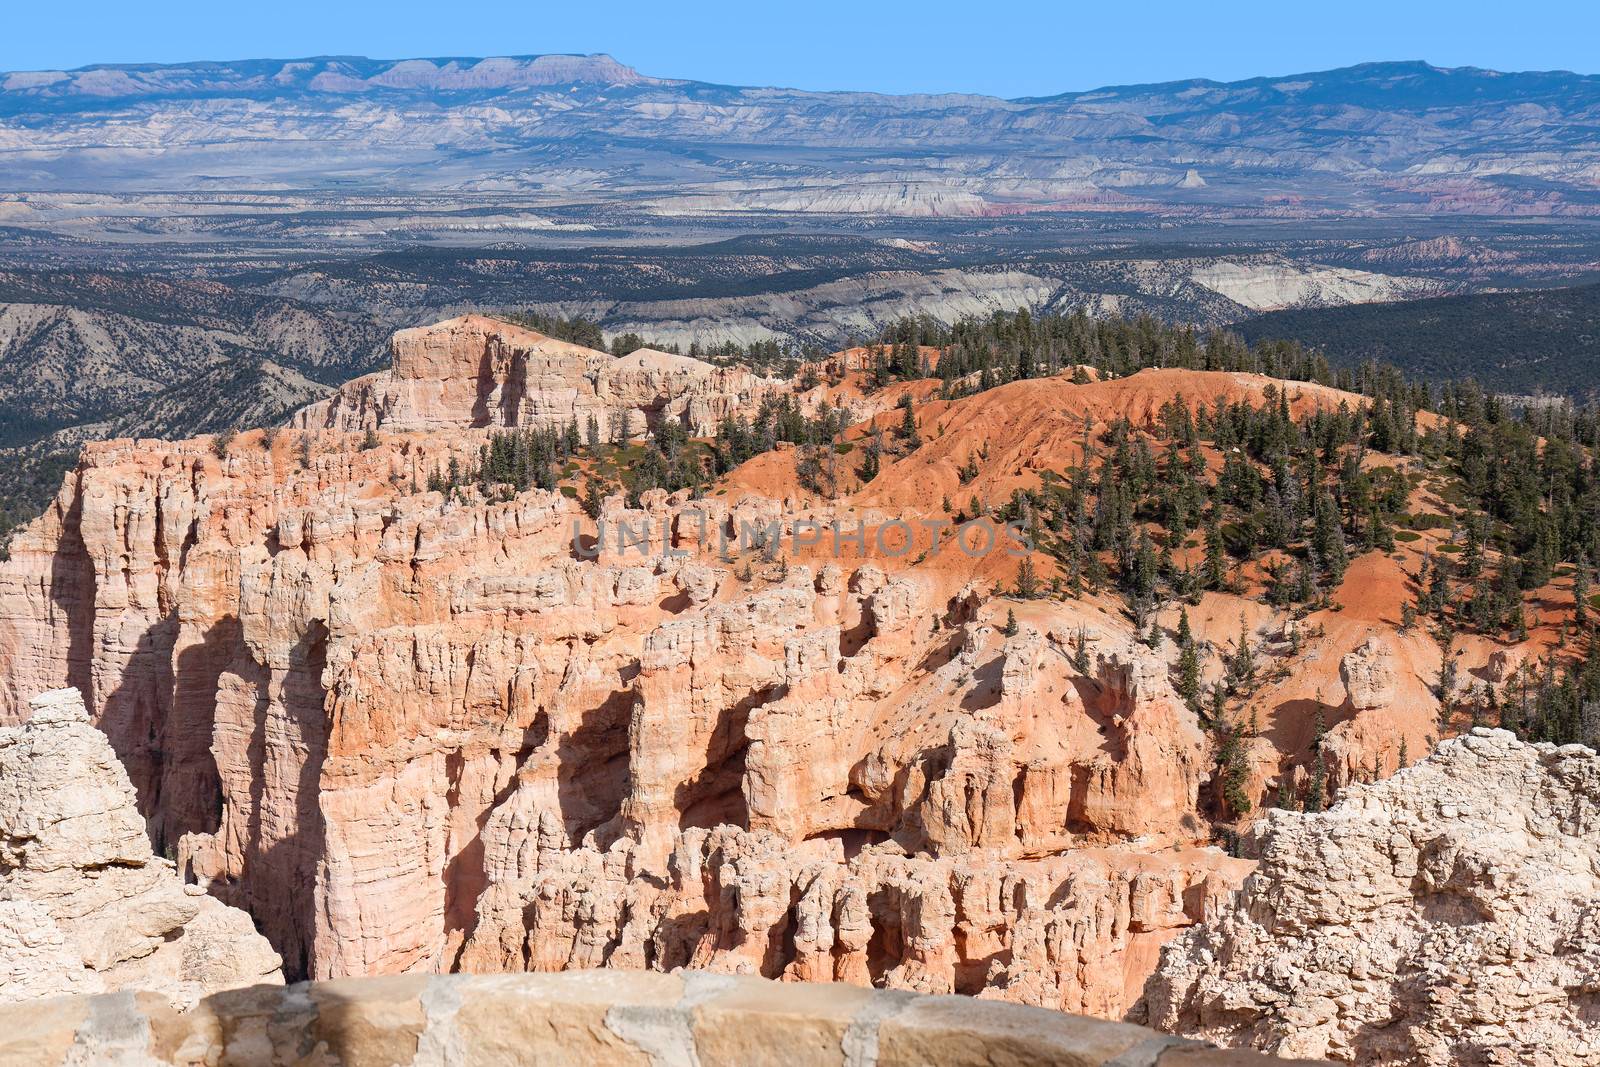 This image was taken at Bryce Canyon National Park. It is from the Rainbow Point Lookout at elevation 9115 ft. The park is an incredible showcase of unique geology.